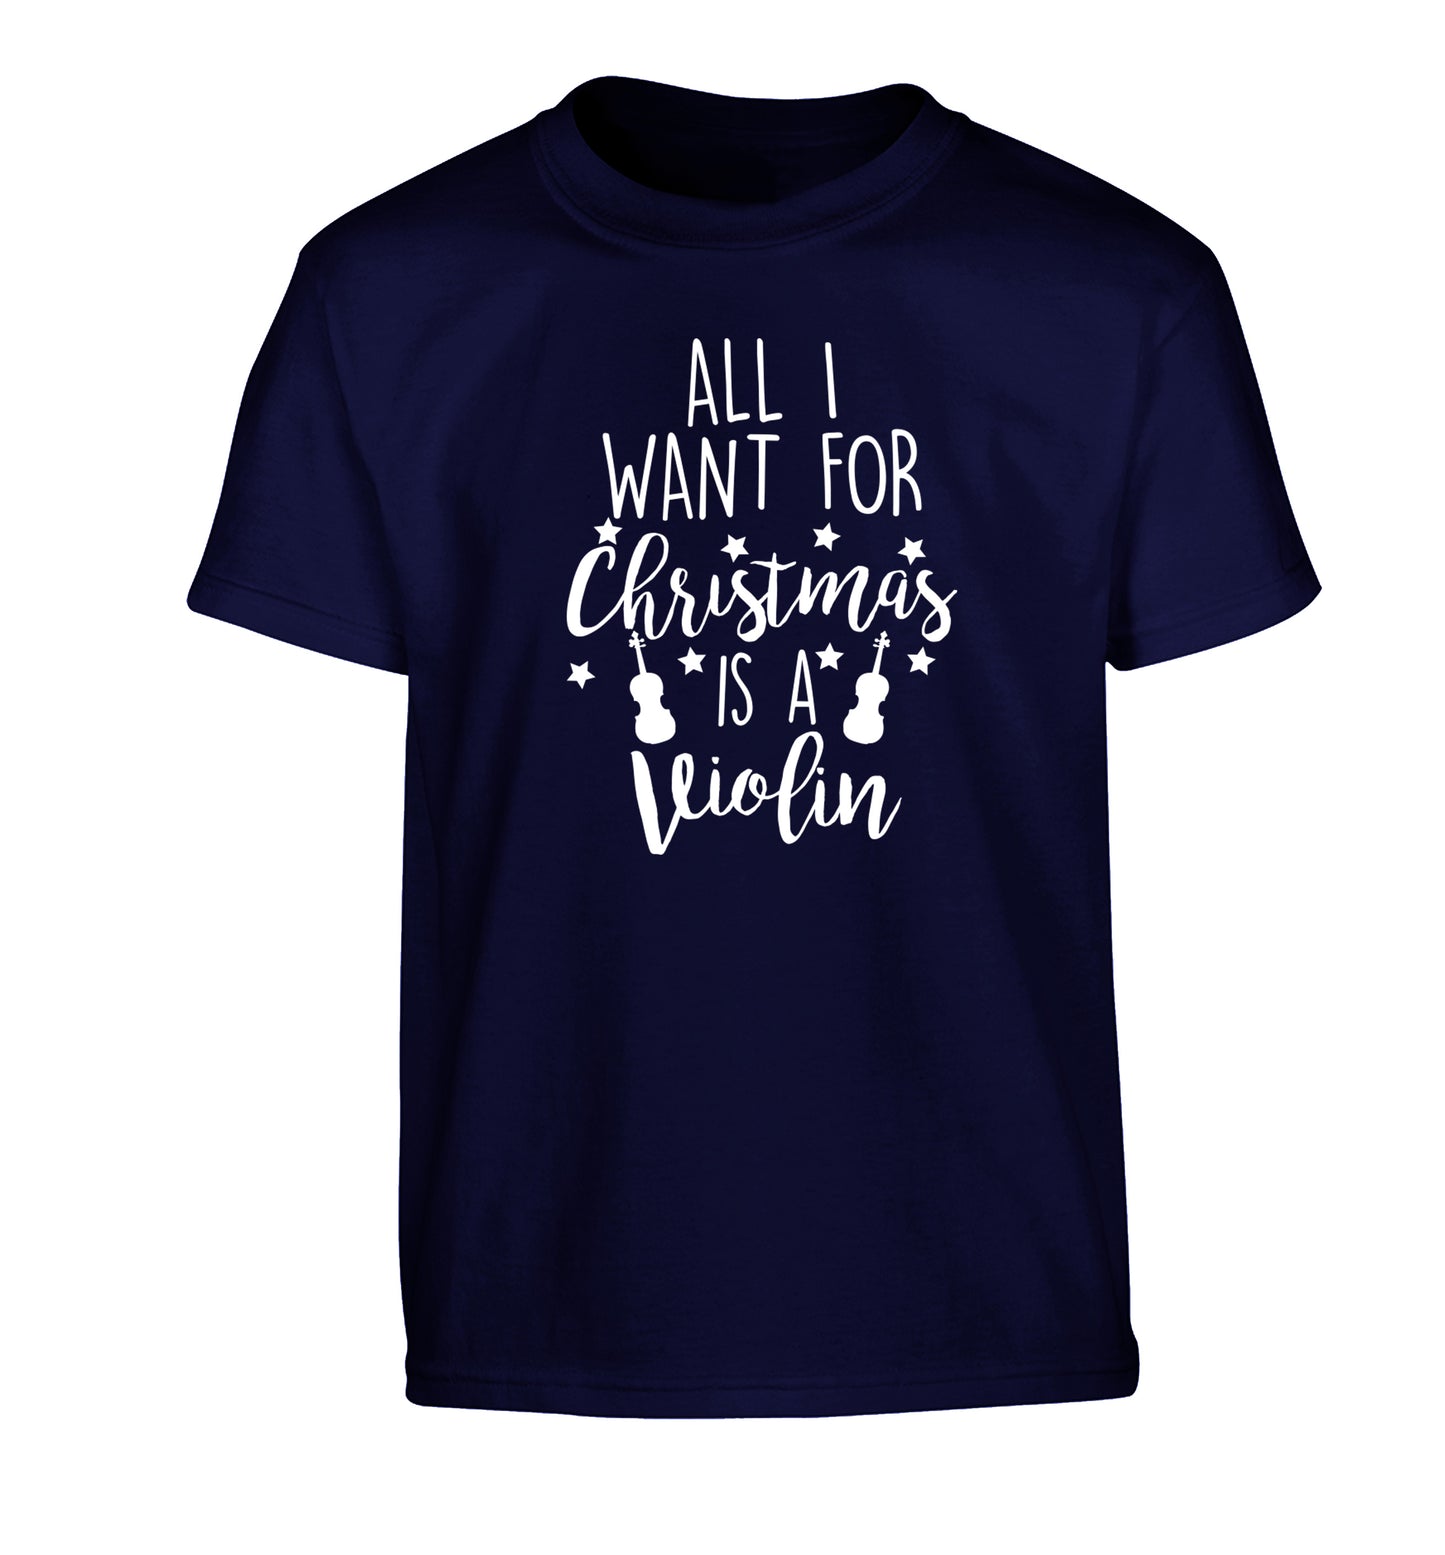 All I Want For Christmas is a Violin Children's navy Tshirt 12-13 Years